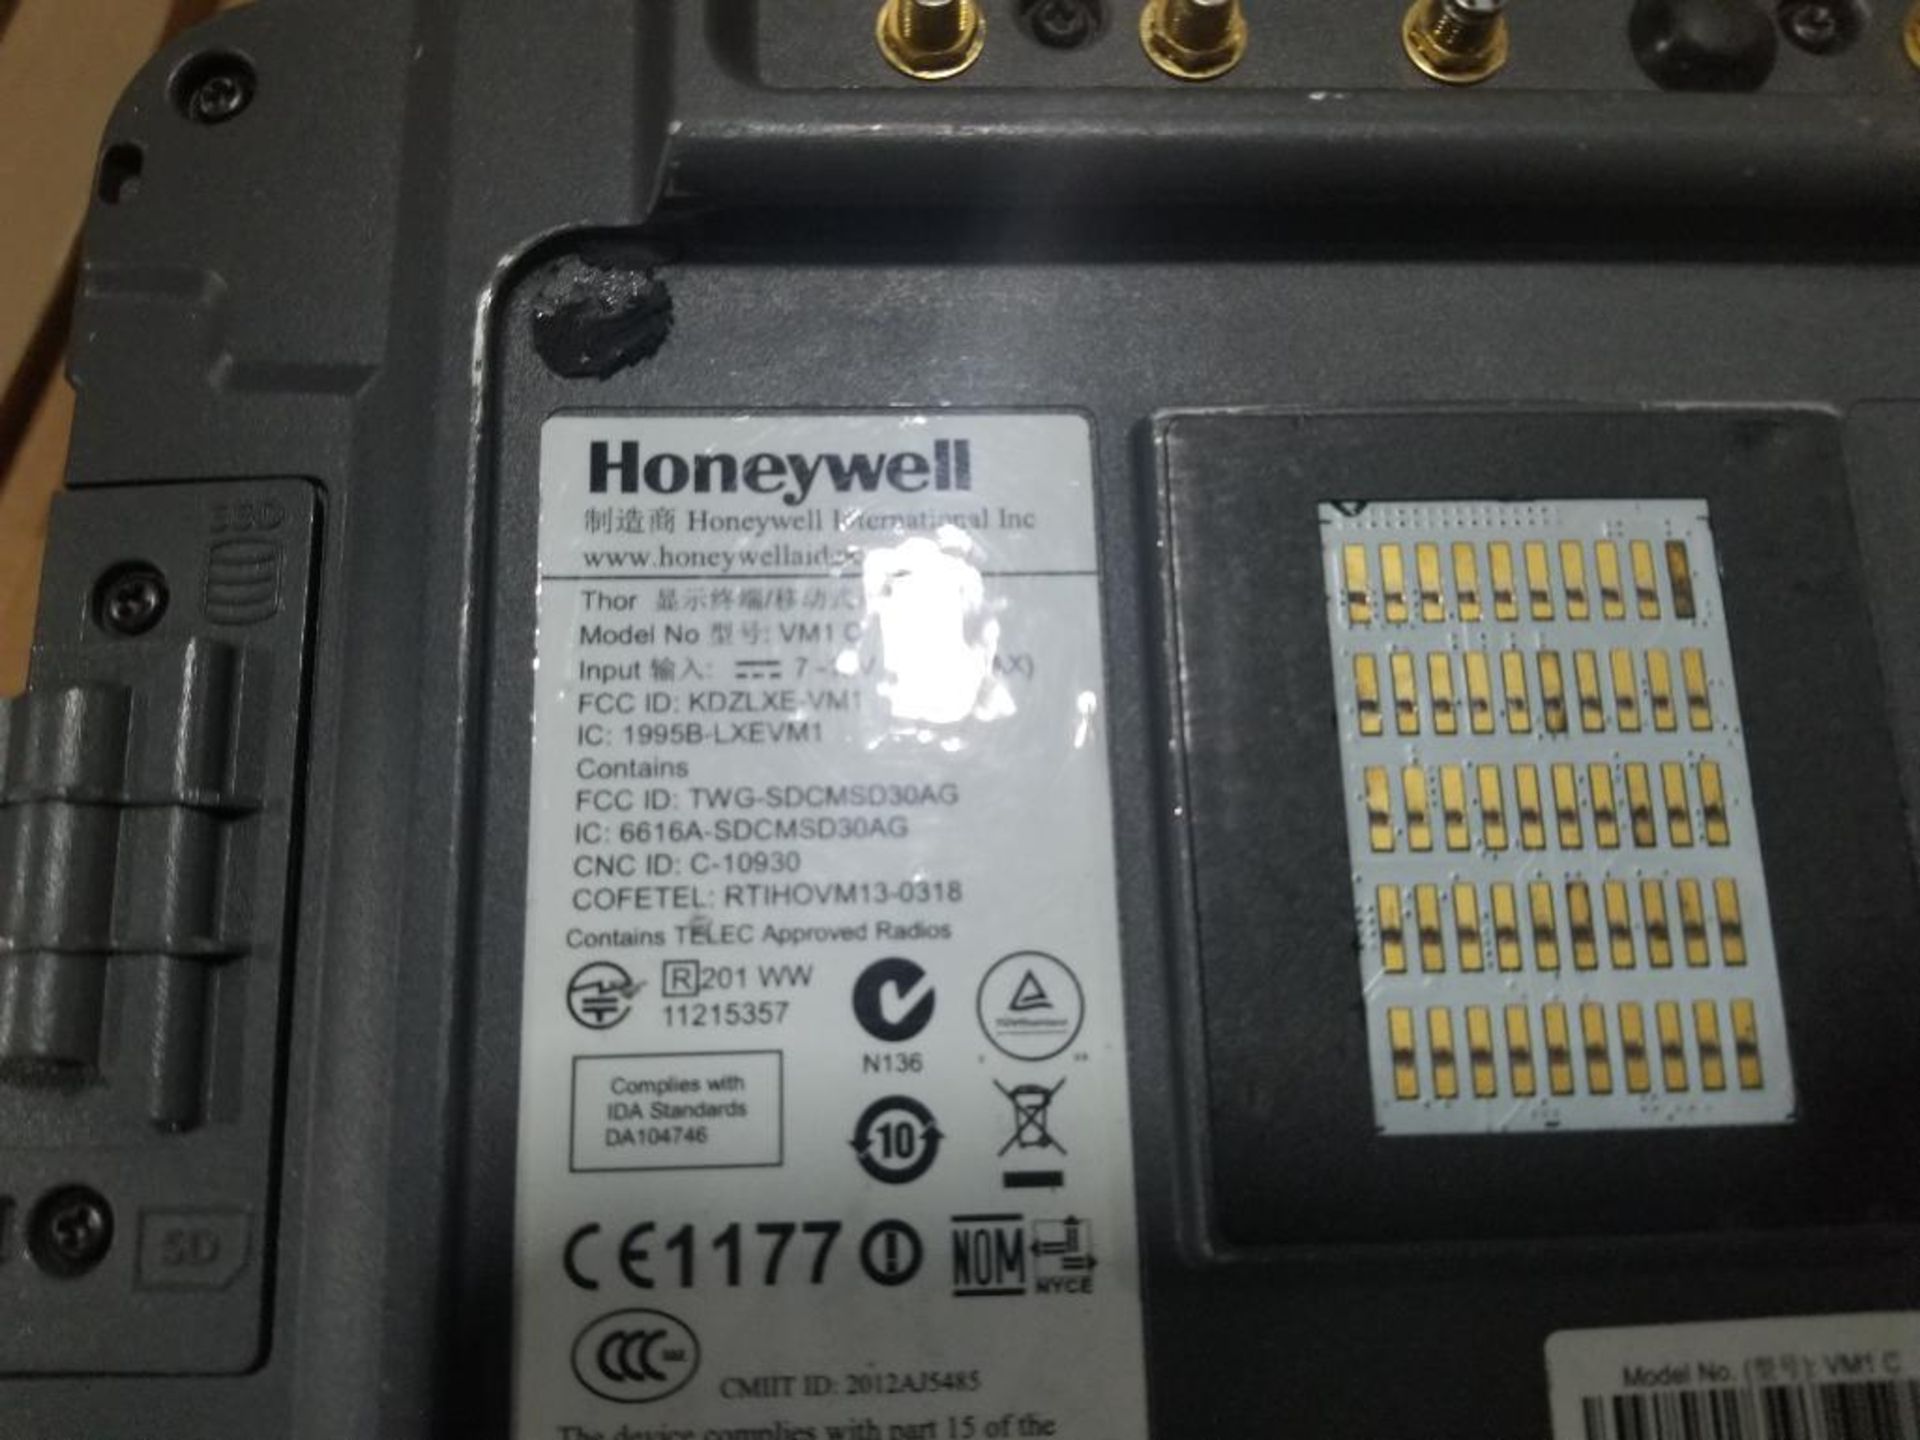 Qty 2 - Honeywell mobile computers. Model Thor VM1. - Image 5 of 5